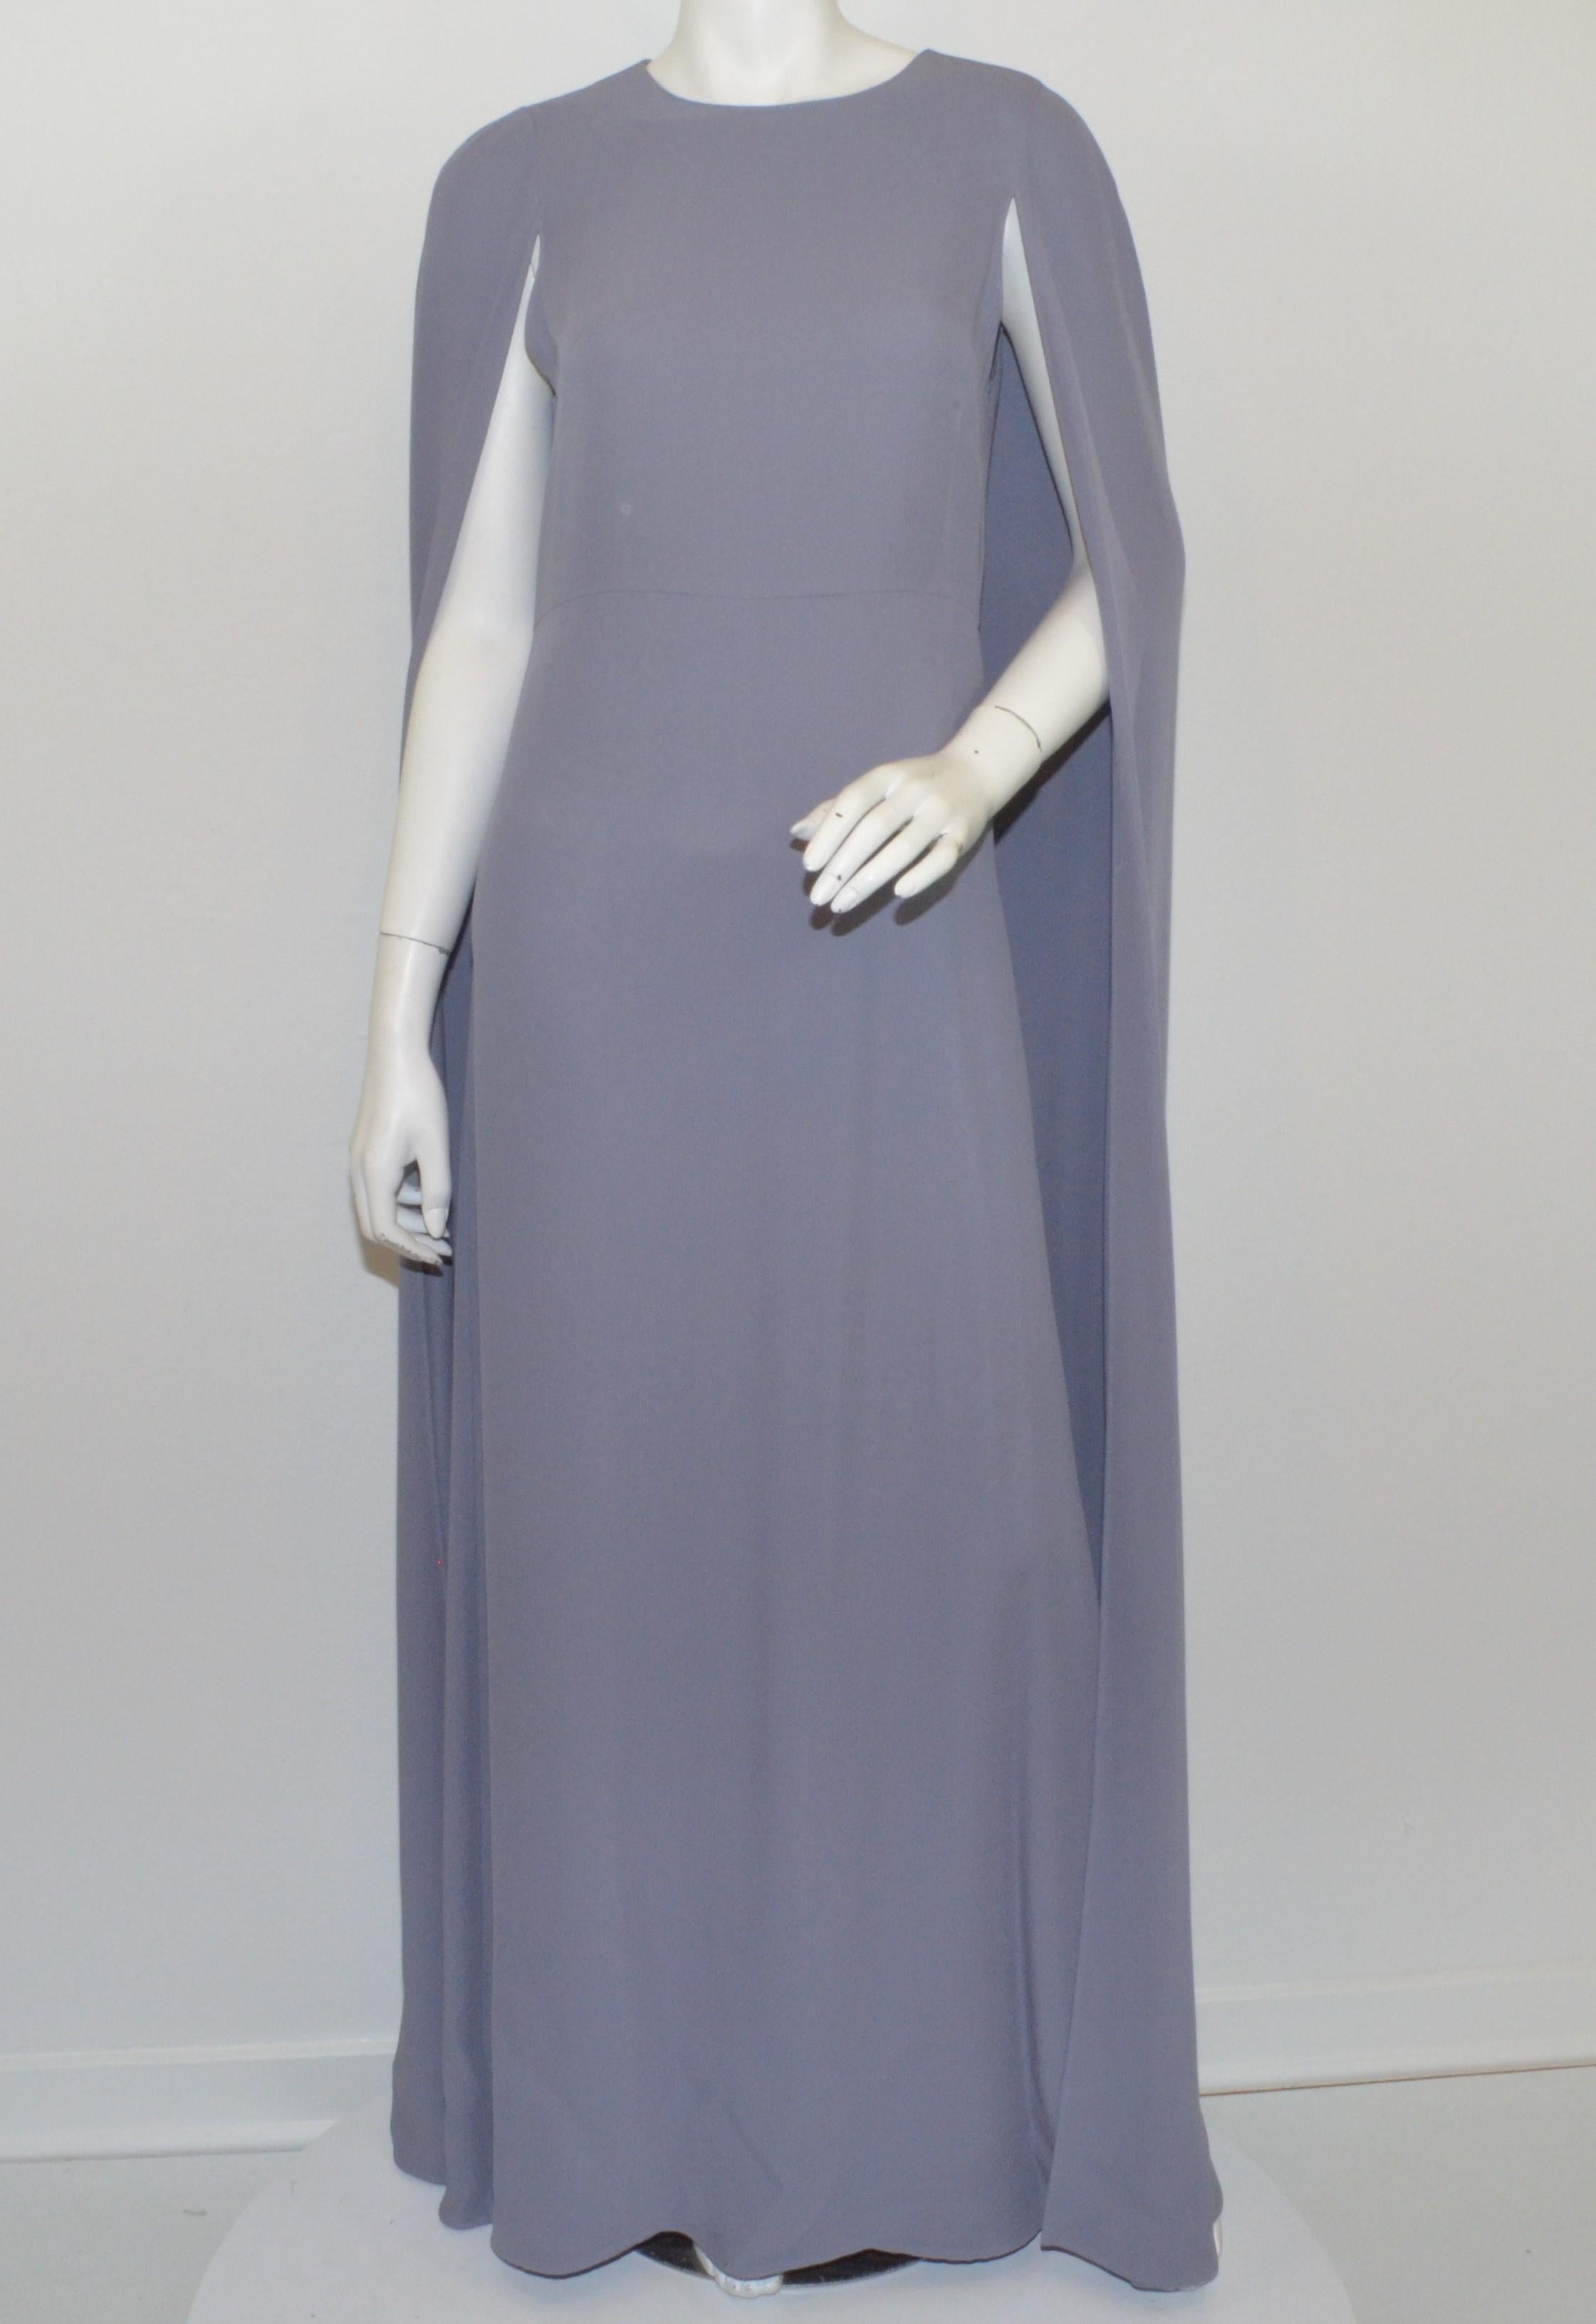 Valentino Cape Gown as seen on Jennifer Lopez, Kim Kardashian, Katy Perry-- Featured in a lilac color with a cape design and column gown. Dress has a back zipper fastening. Labeled size 8, made in Italy.

Measurements:
Bust 36”
Waist 32”
Hips